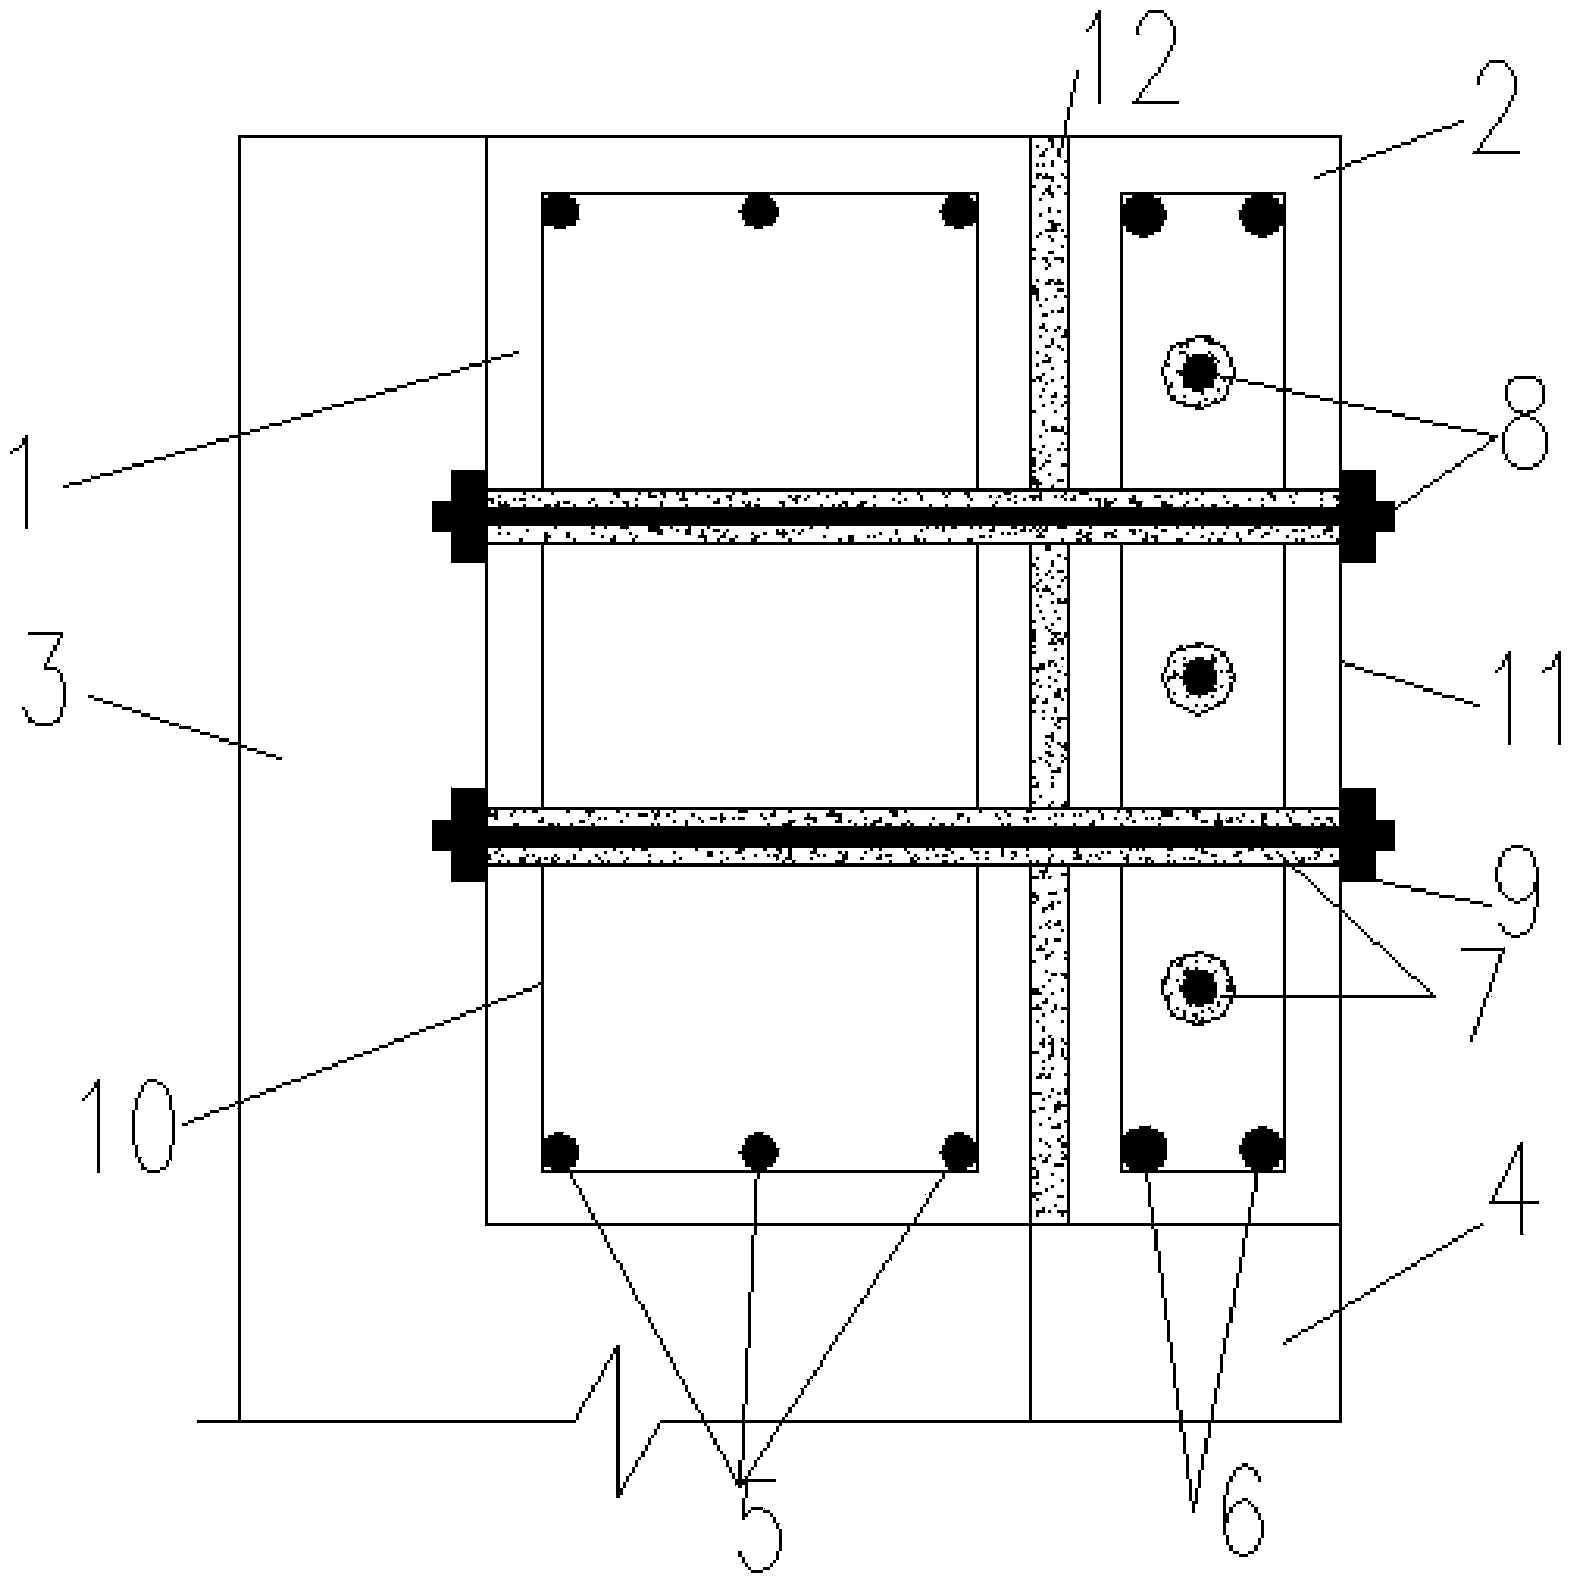 Structure reinforcing method in externally-attached steel-encased assembly type PC frame mode